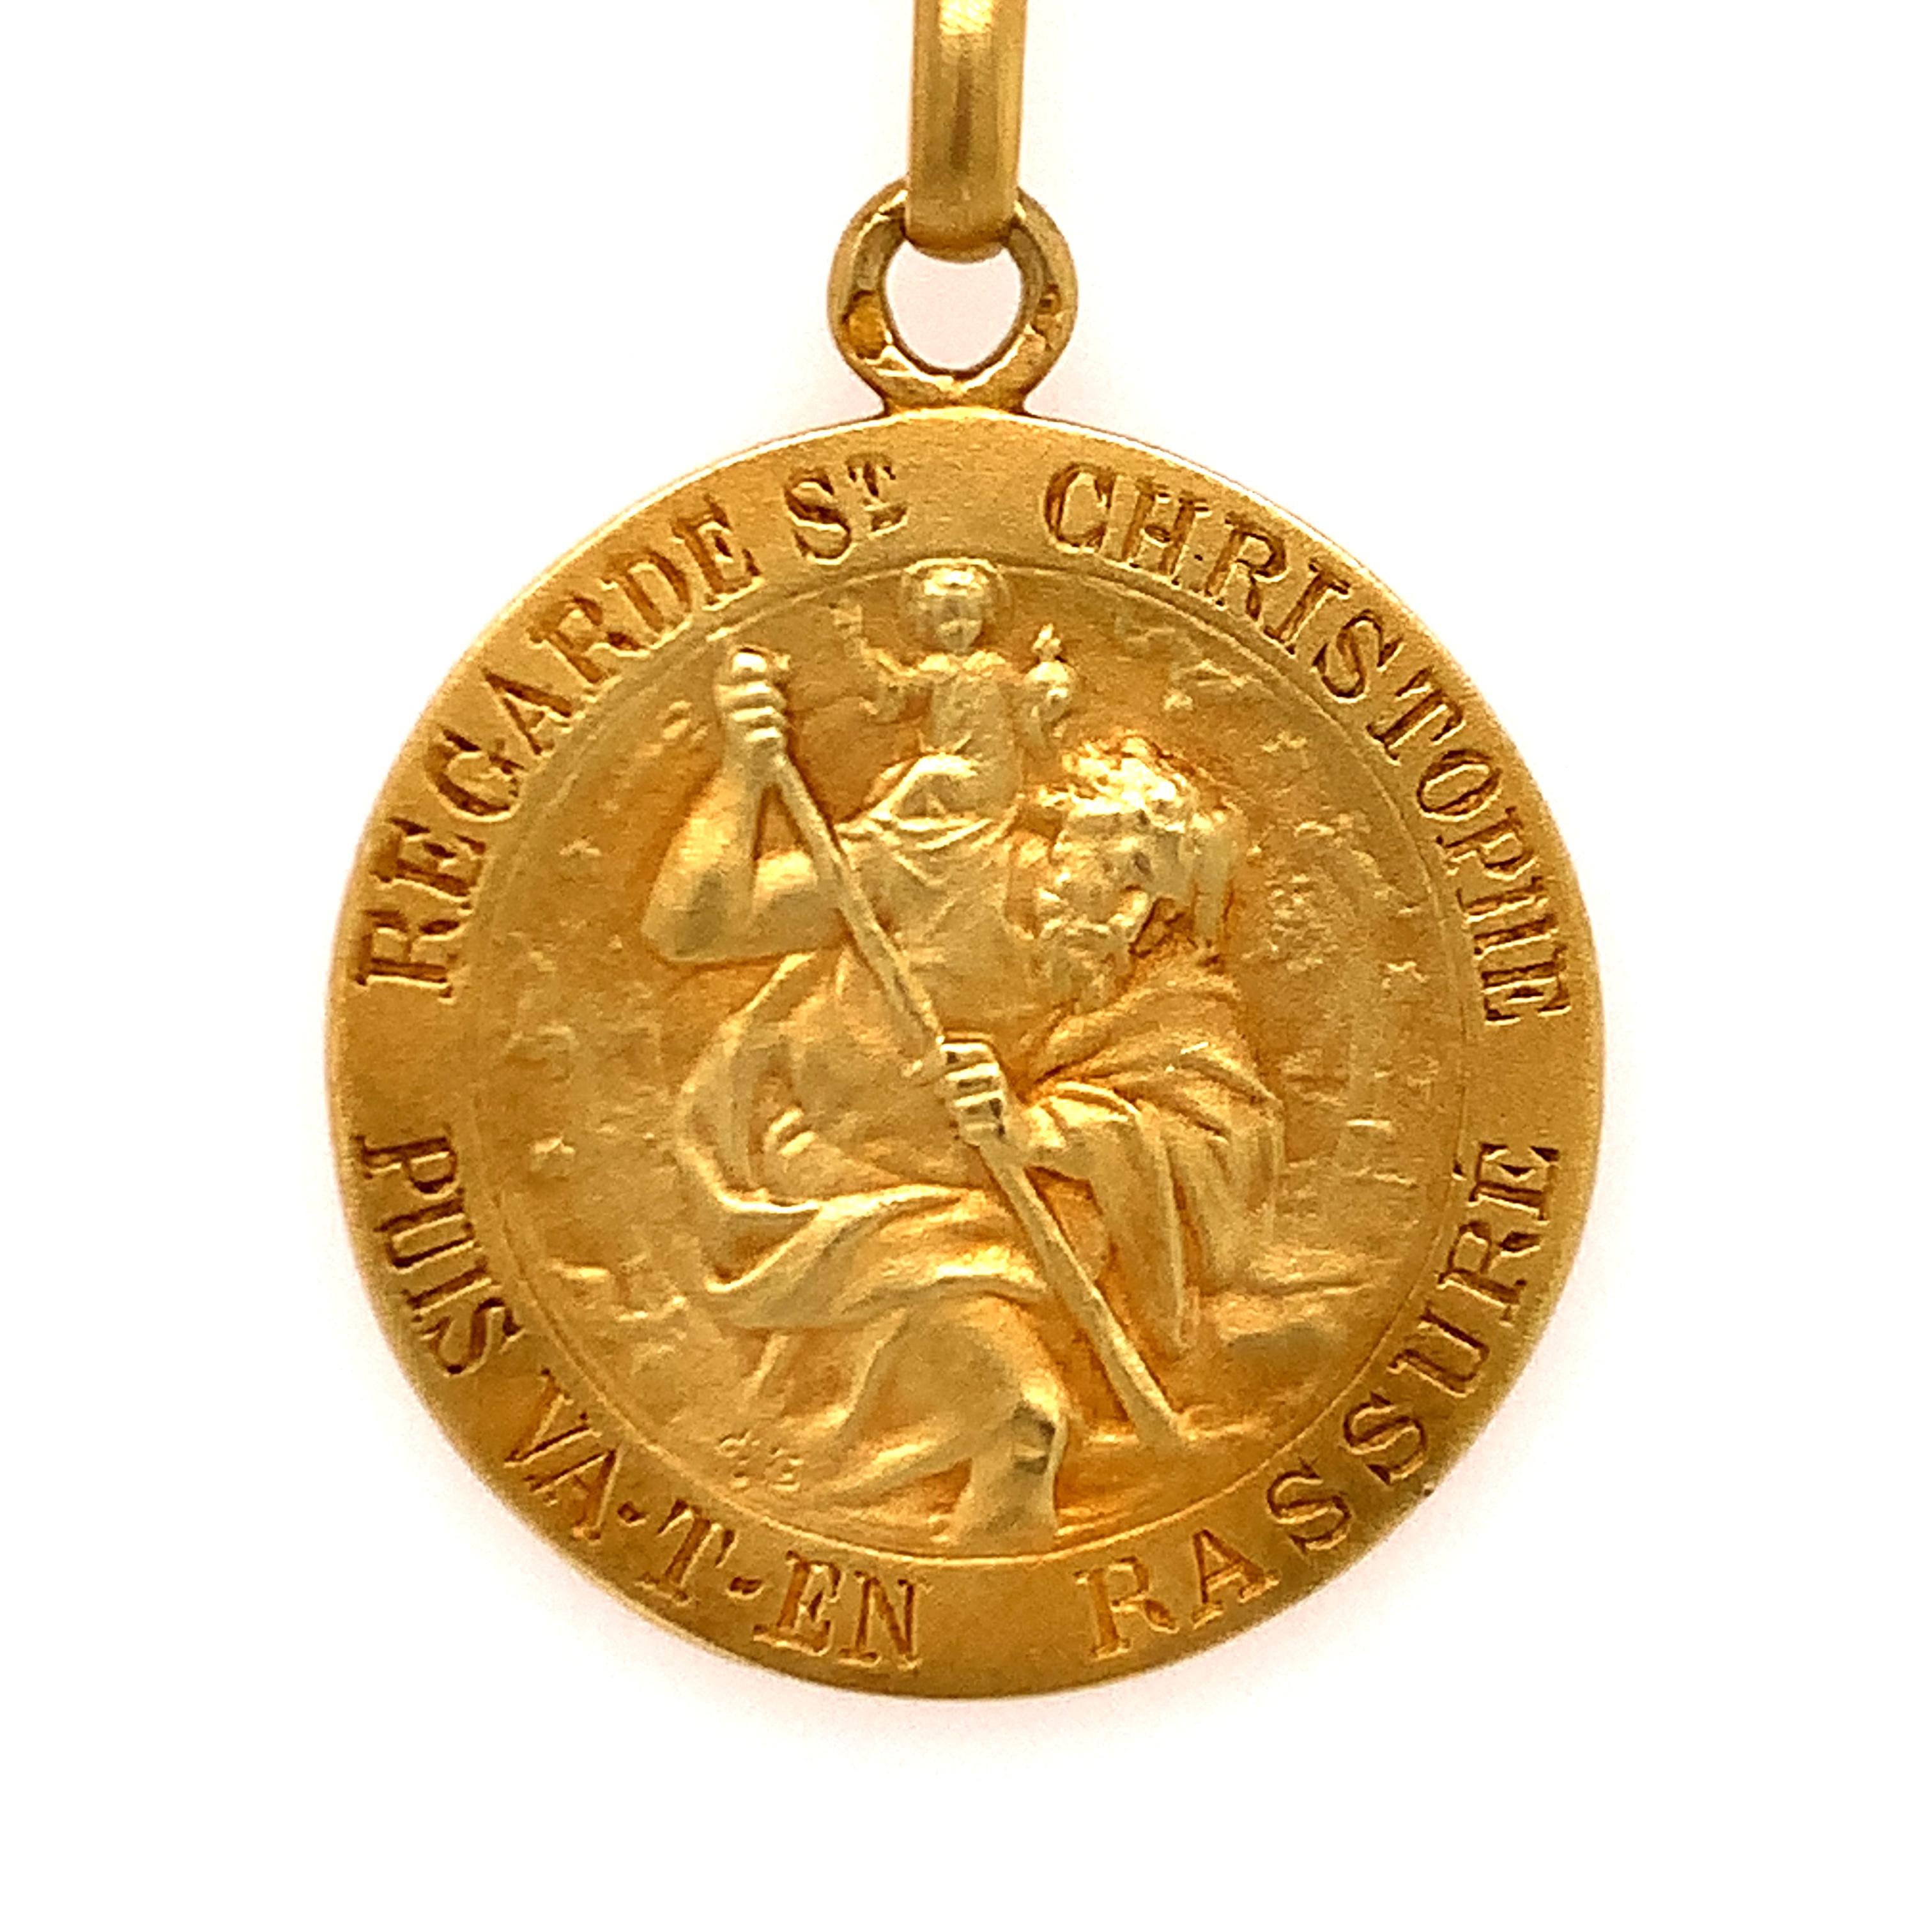 Most beautiful St. Christopher's medal.  Made in France, c.1910. Soft glowing patina. On the front foreground is a well-detailed raised figure of St. Christopher holding a child, in the background is the full zodiac calendar with figural symbols for